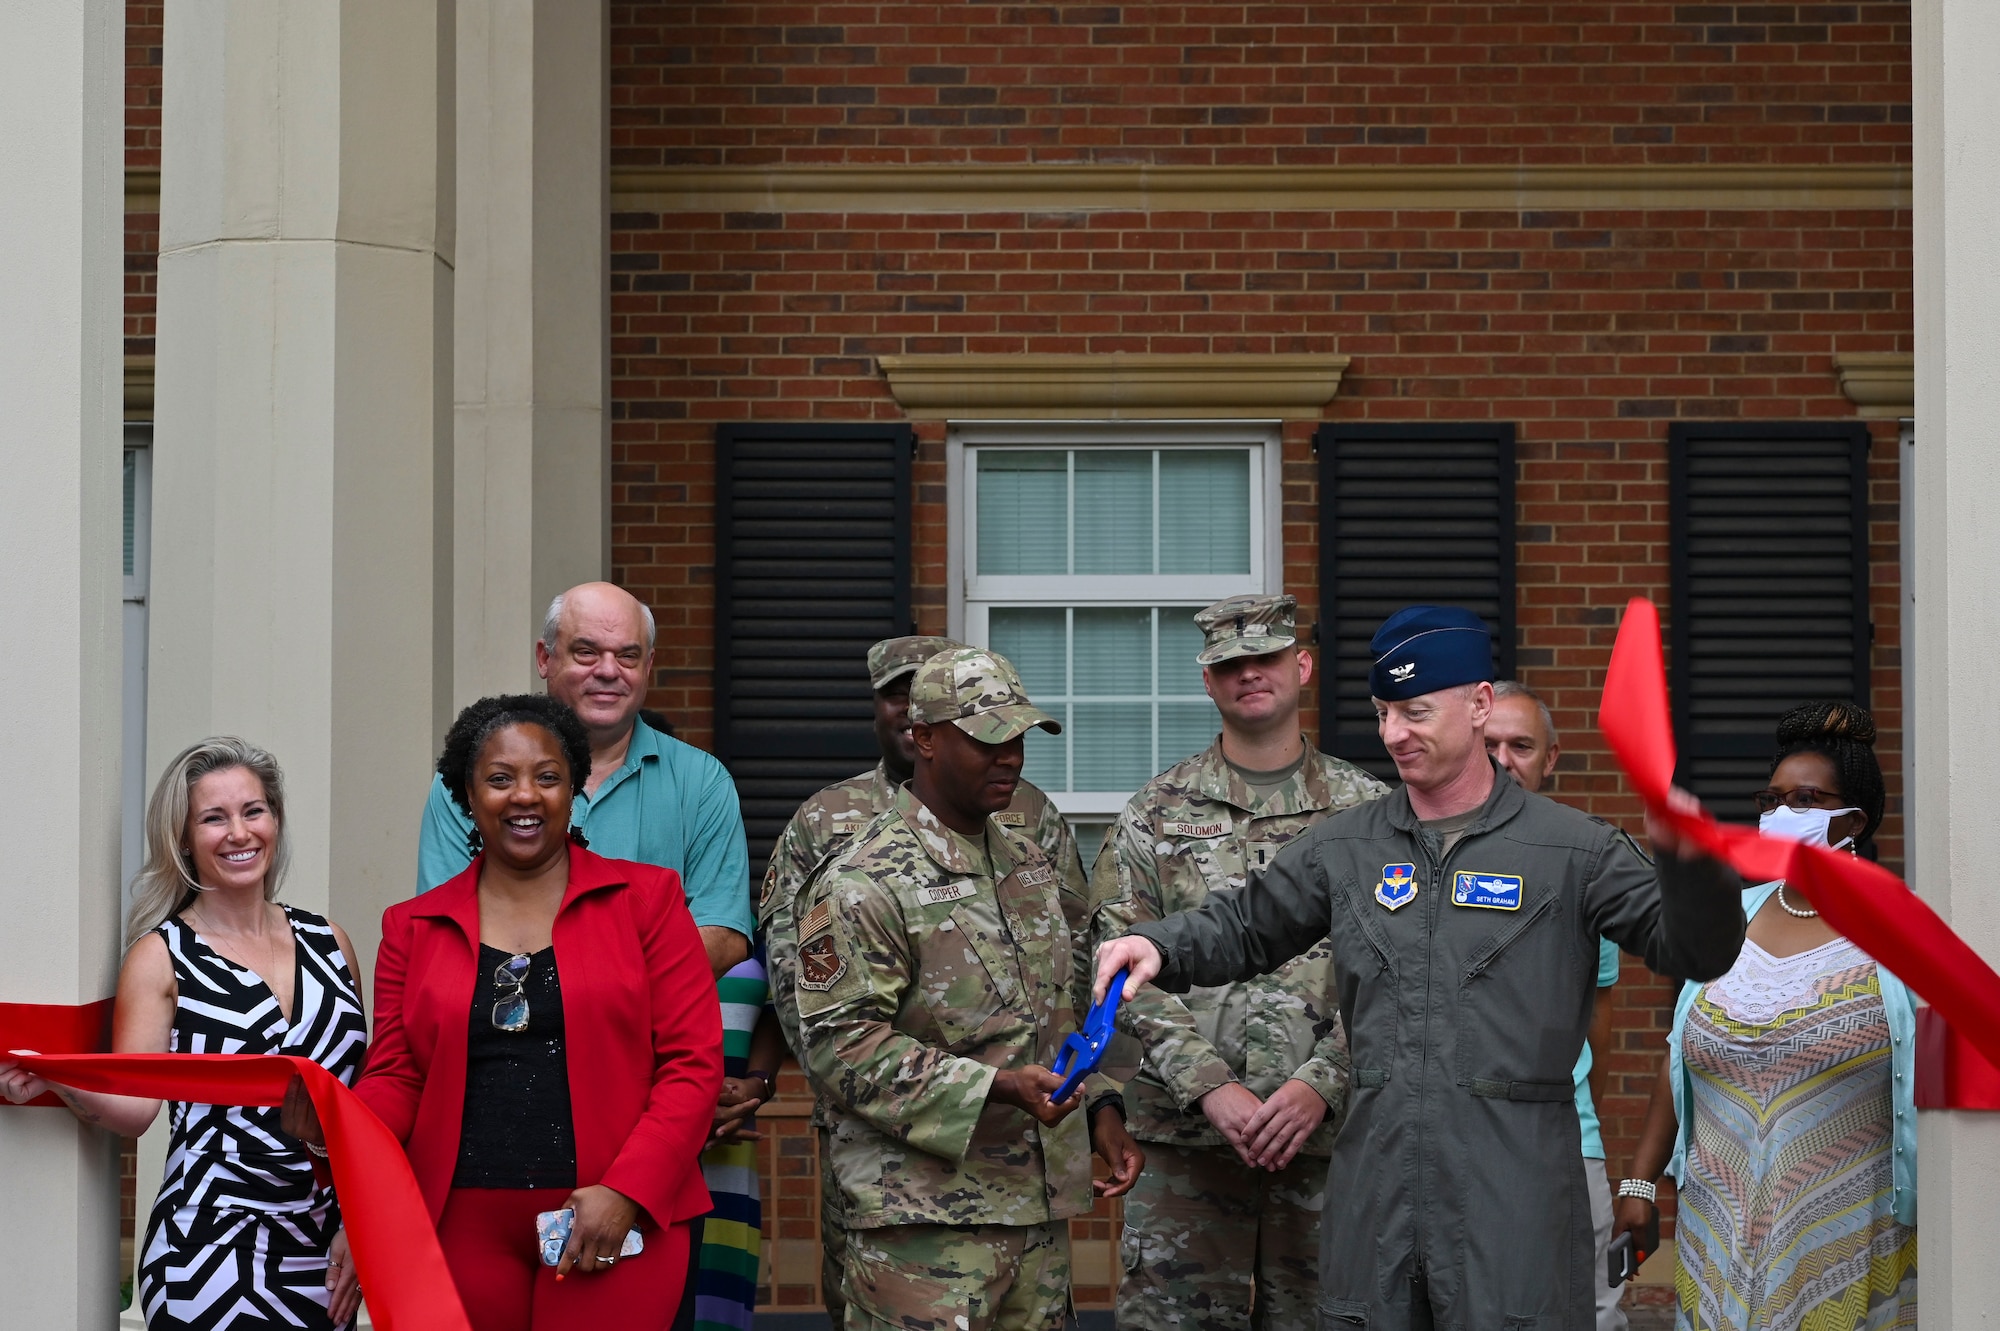 U.S. Air Force Col. Seth Graham (right), 14th Flying Training Wing commander, cuts a ribbon with Chief Master Sgt. Antonio Cooper, 14FTW command chief, signifying the grand opening of the new Welcome Center, July 20, 2021, on Columbus Air Force Base, Miss. Within the center new Team Blaze members will find a one stop shop for all their in-processing needs to include, Finance, Medical, Housing, Military Personnel Flight, and the Traffic Management Office. (U.S. Air Force photo by Airman 1st Class Jessica Haynie)